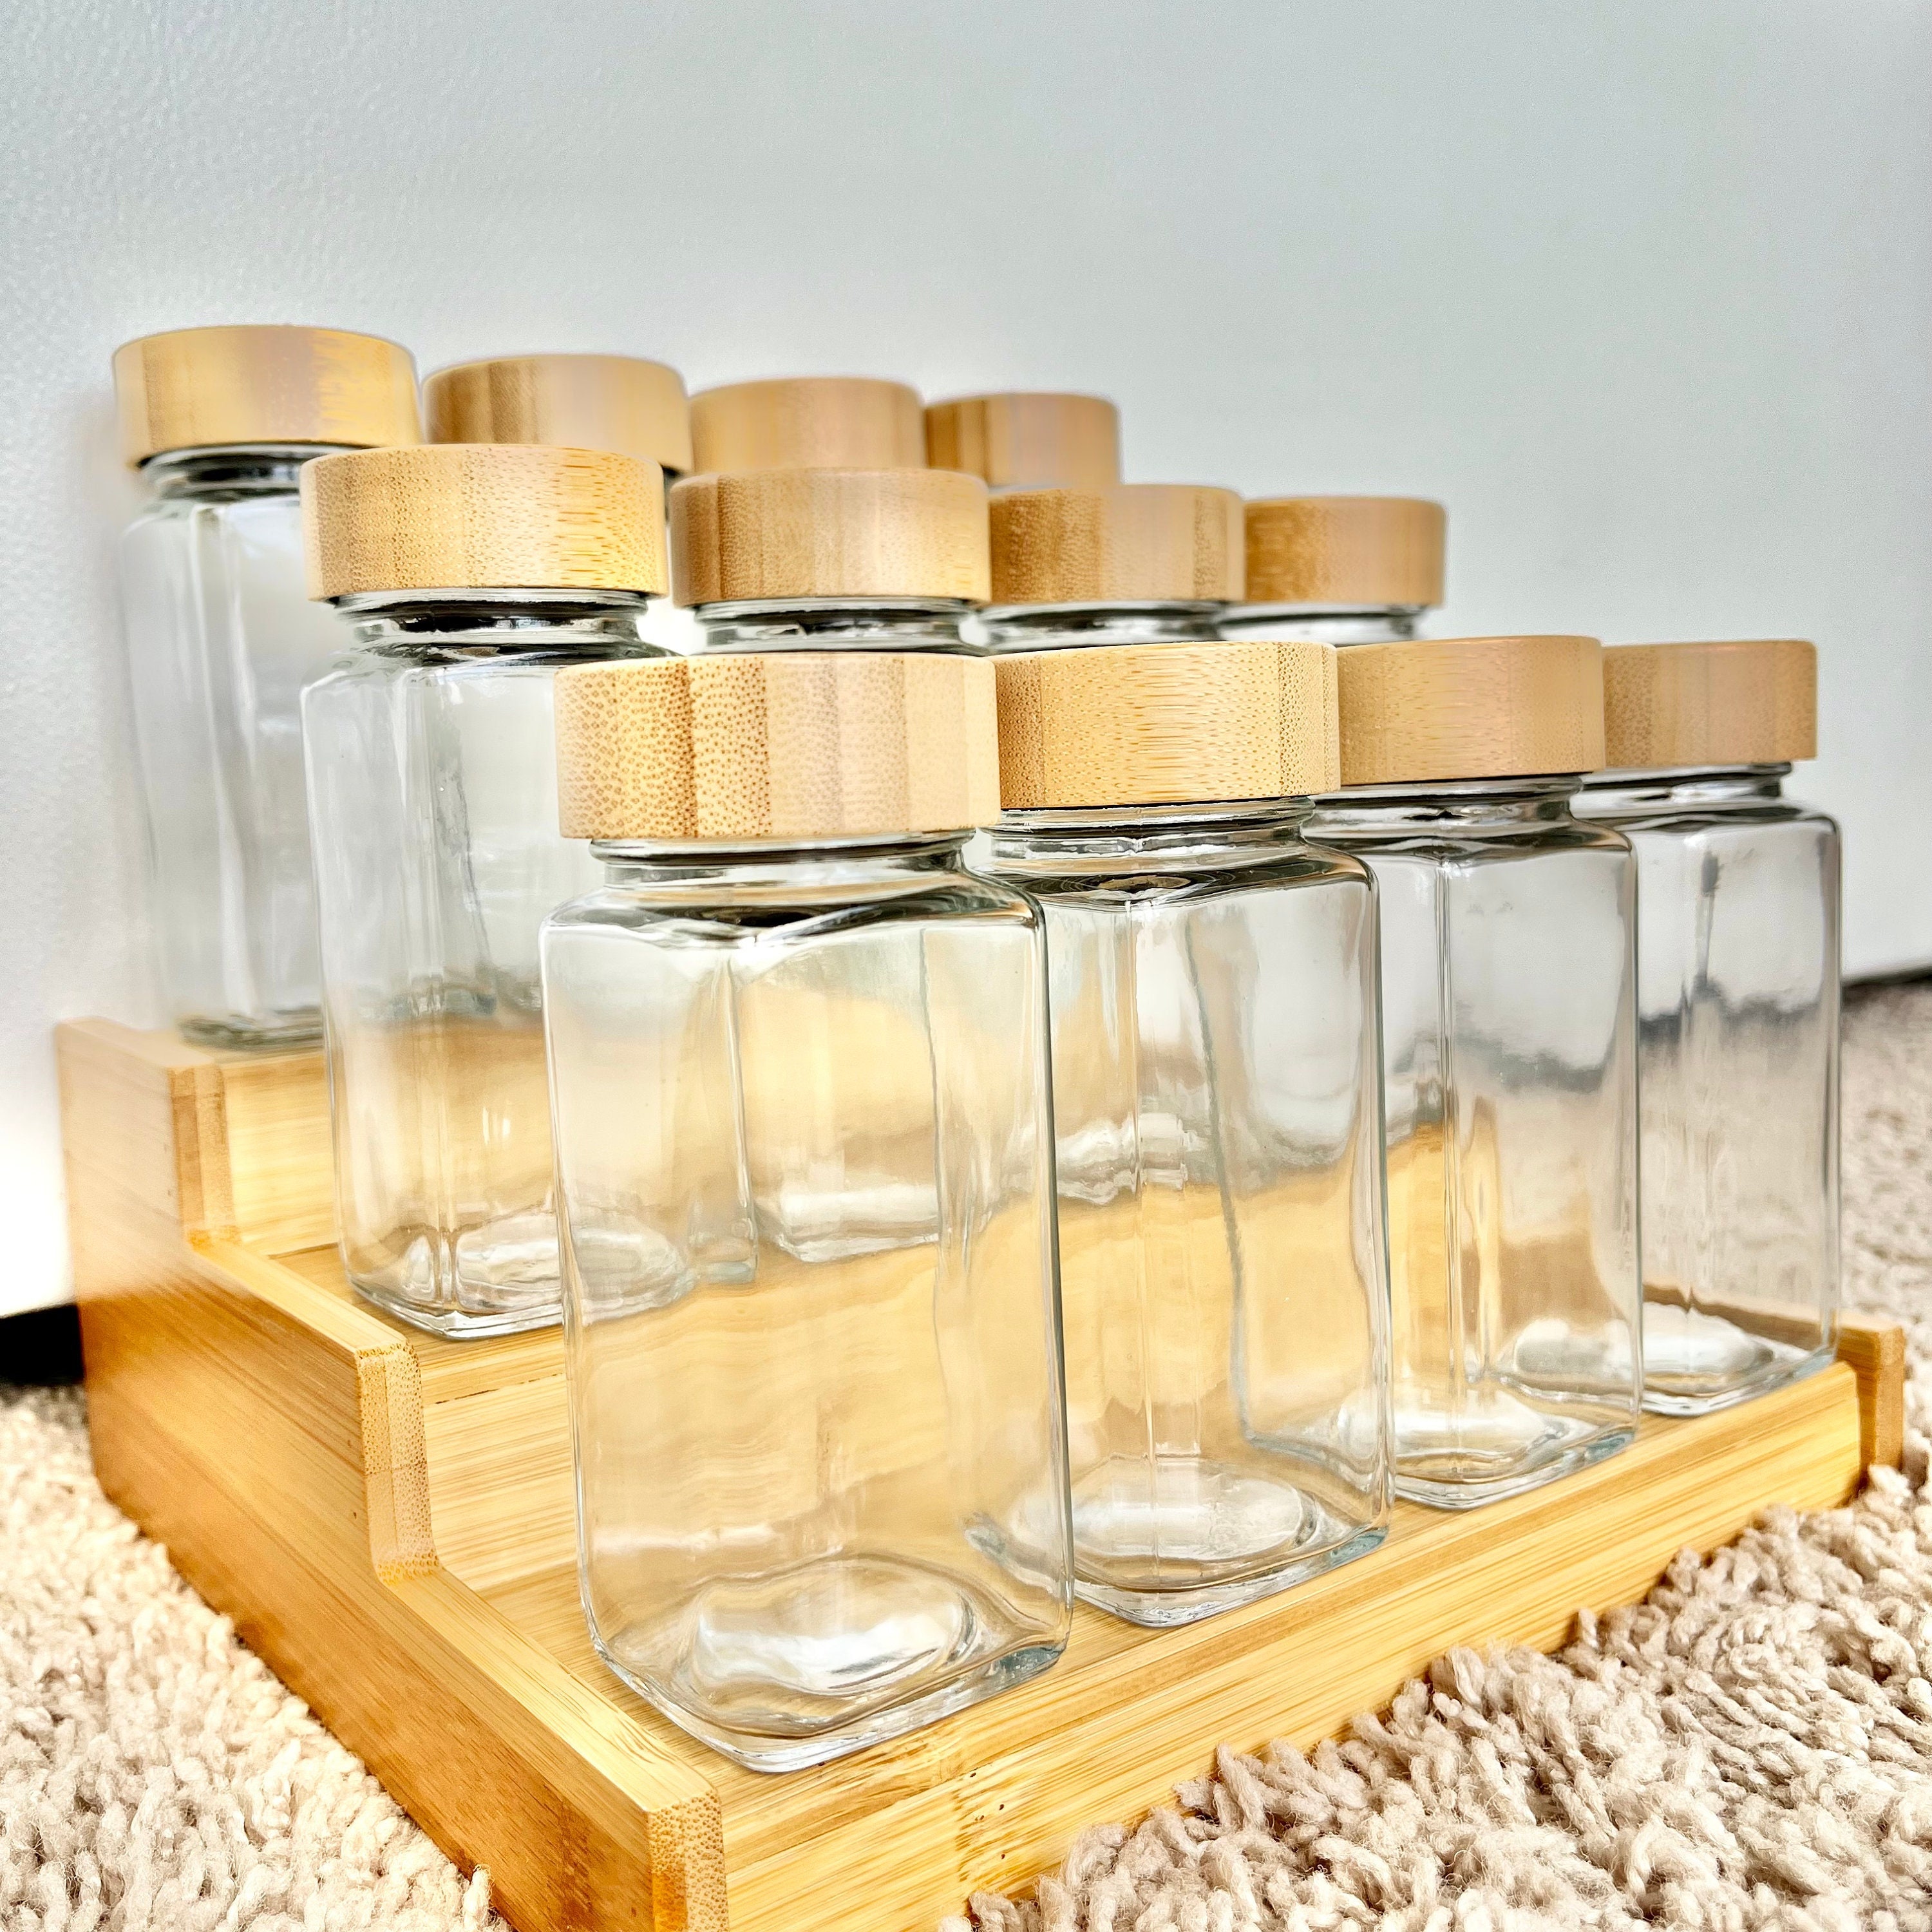 Elevated Habitat 12 eco-friendly Spice Jars Glass with airtight silicone  seals, bamboo lids and 130 pre printed spice labels. Storage containers